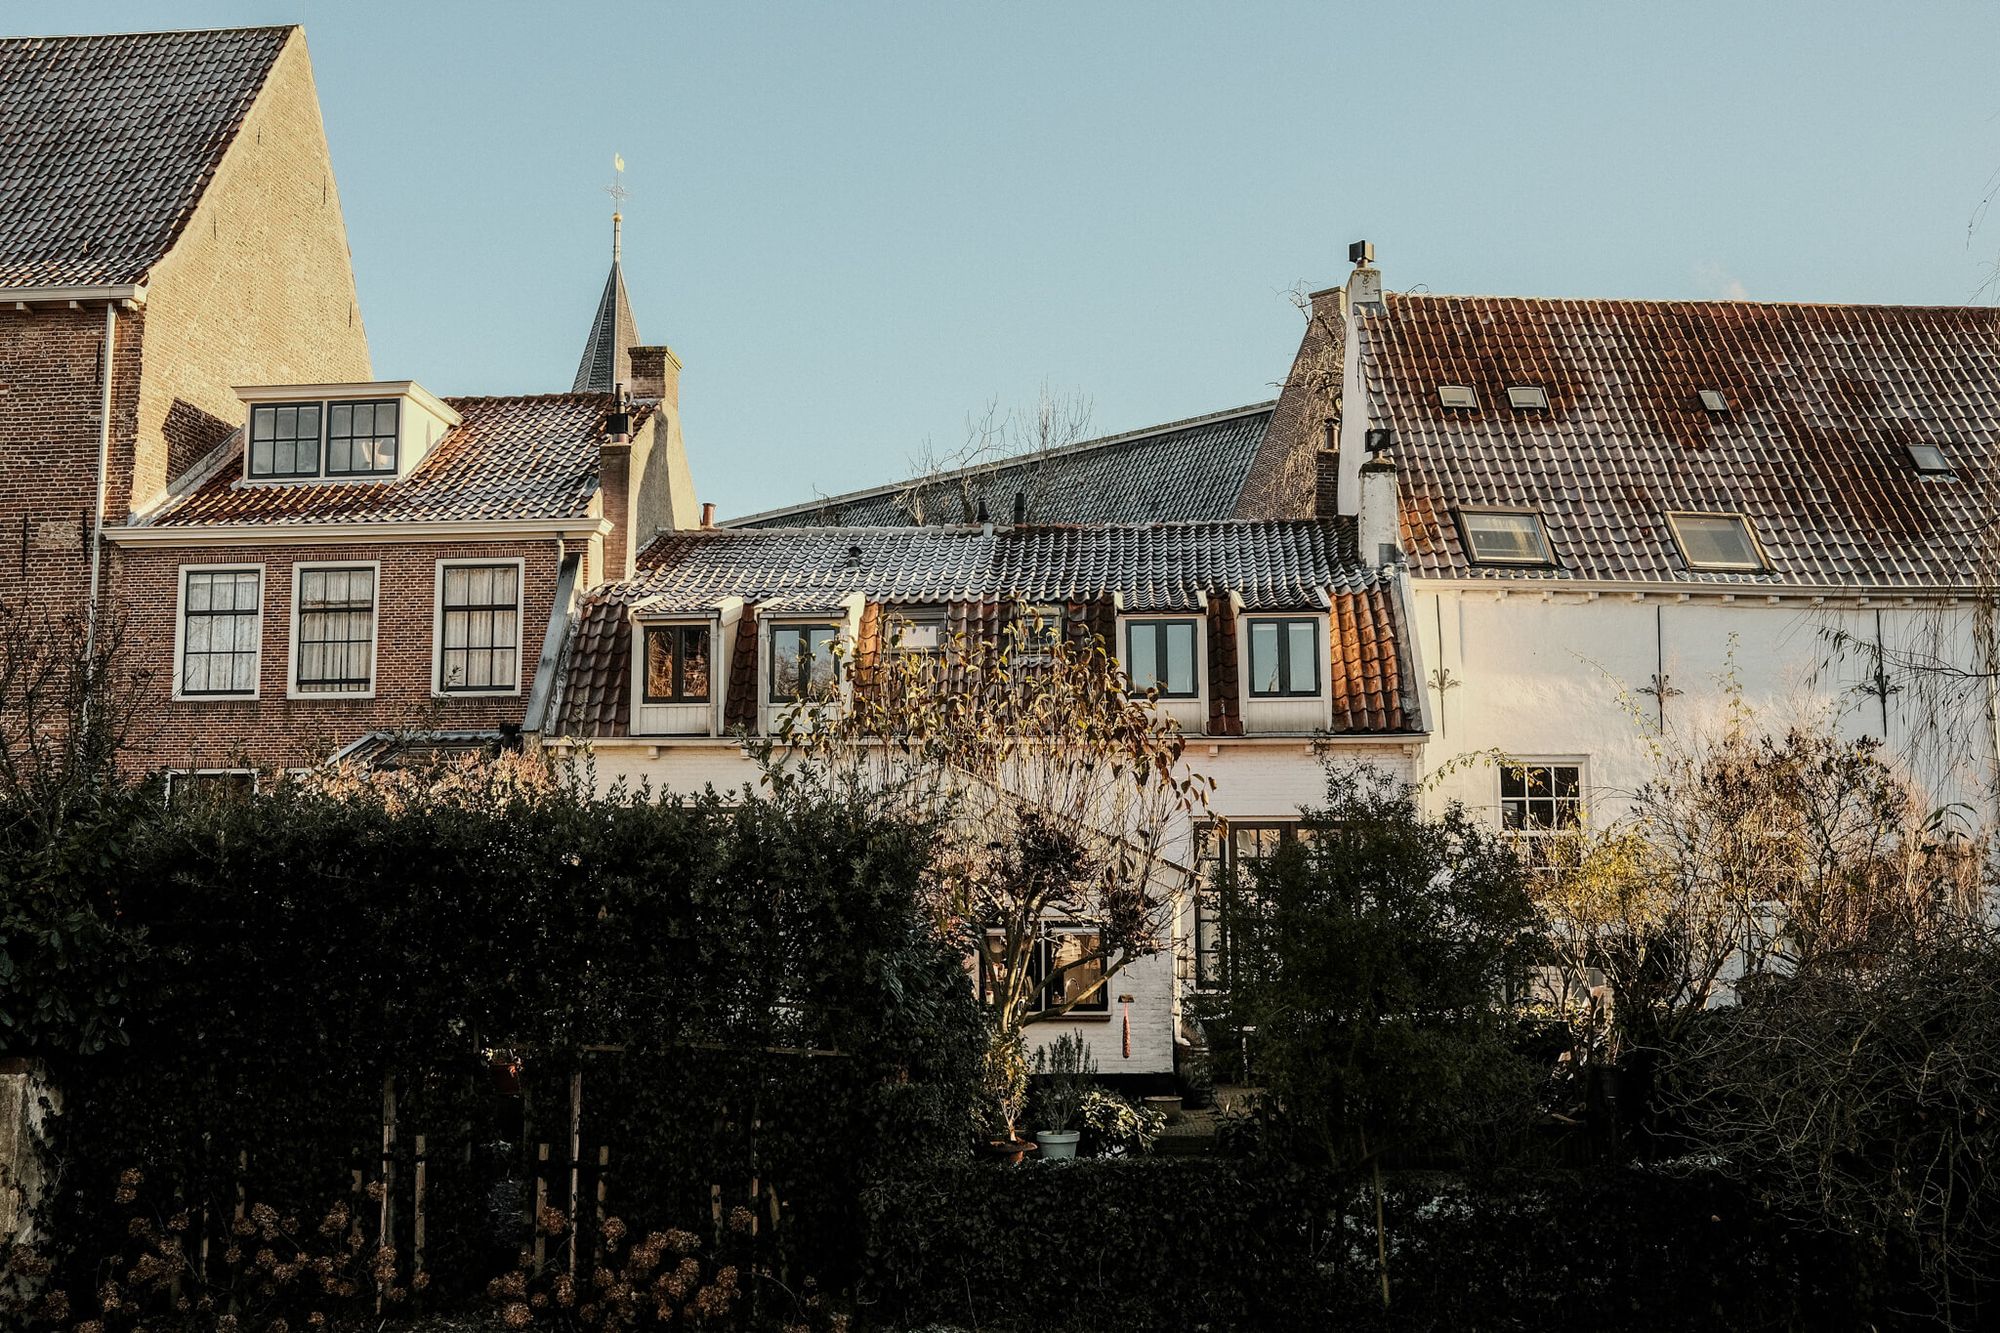 The old houses of Muurhuizen, photographed from across the canal they are situated on.